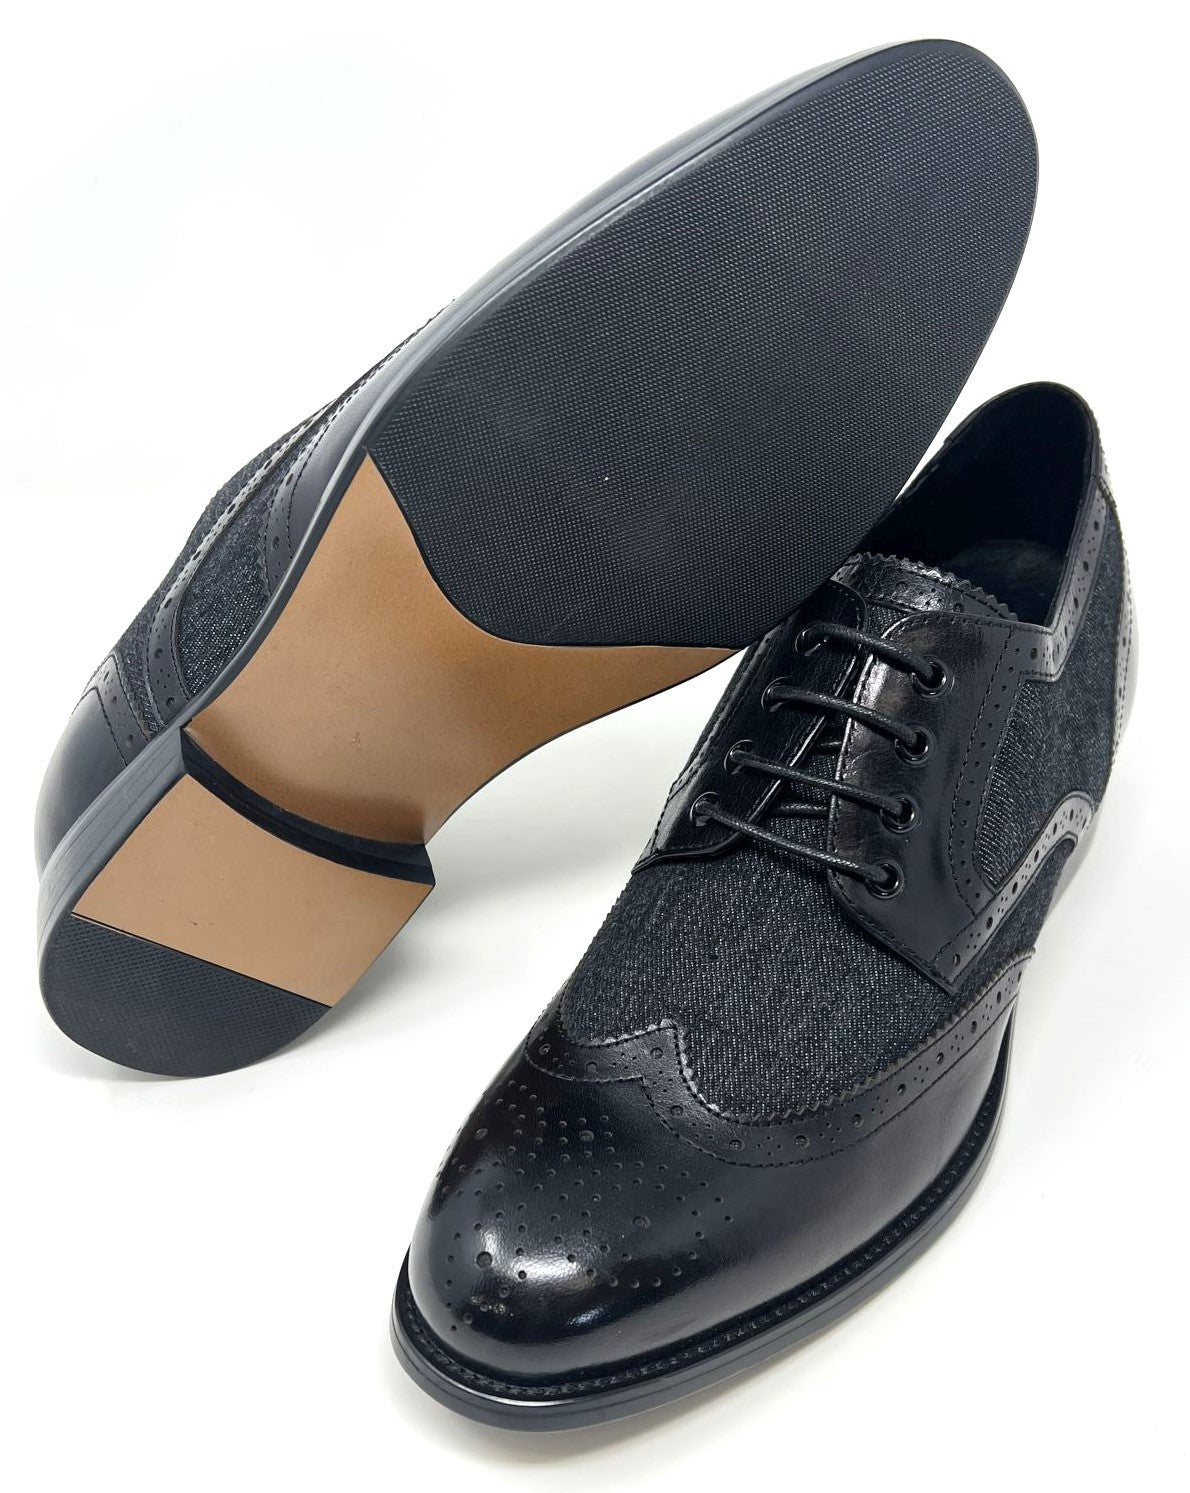 FSE0123 - 2.6 Inches Taller (Black) - Size 7.5 Only